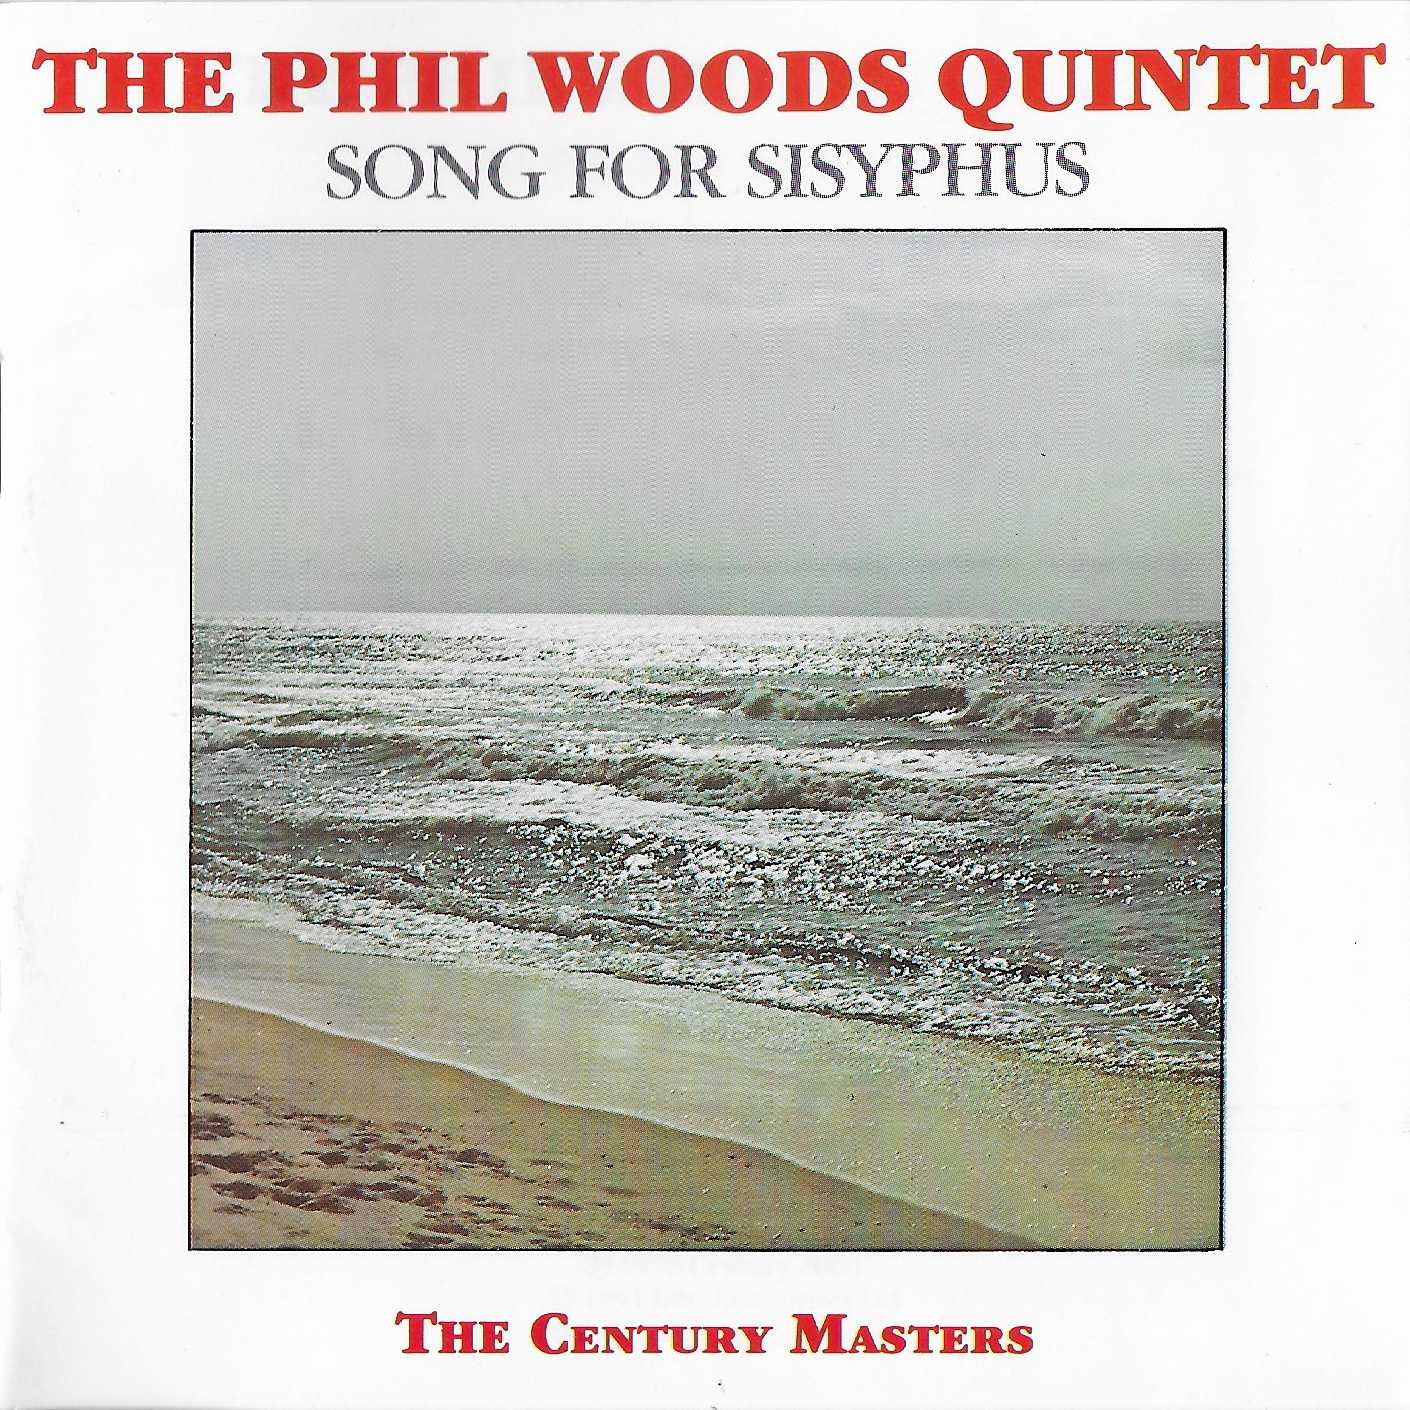 Picture of CJCD 831 The Century Catalogue - Song for Sisyphus - The Phil Woods Quintet by artist Phil Woods  from the BBC cds - Records and Tapes library